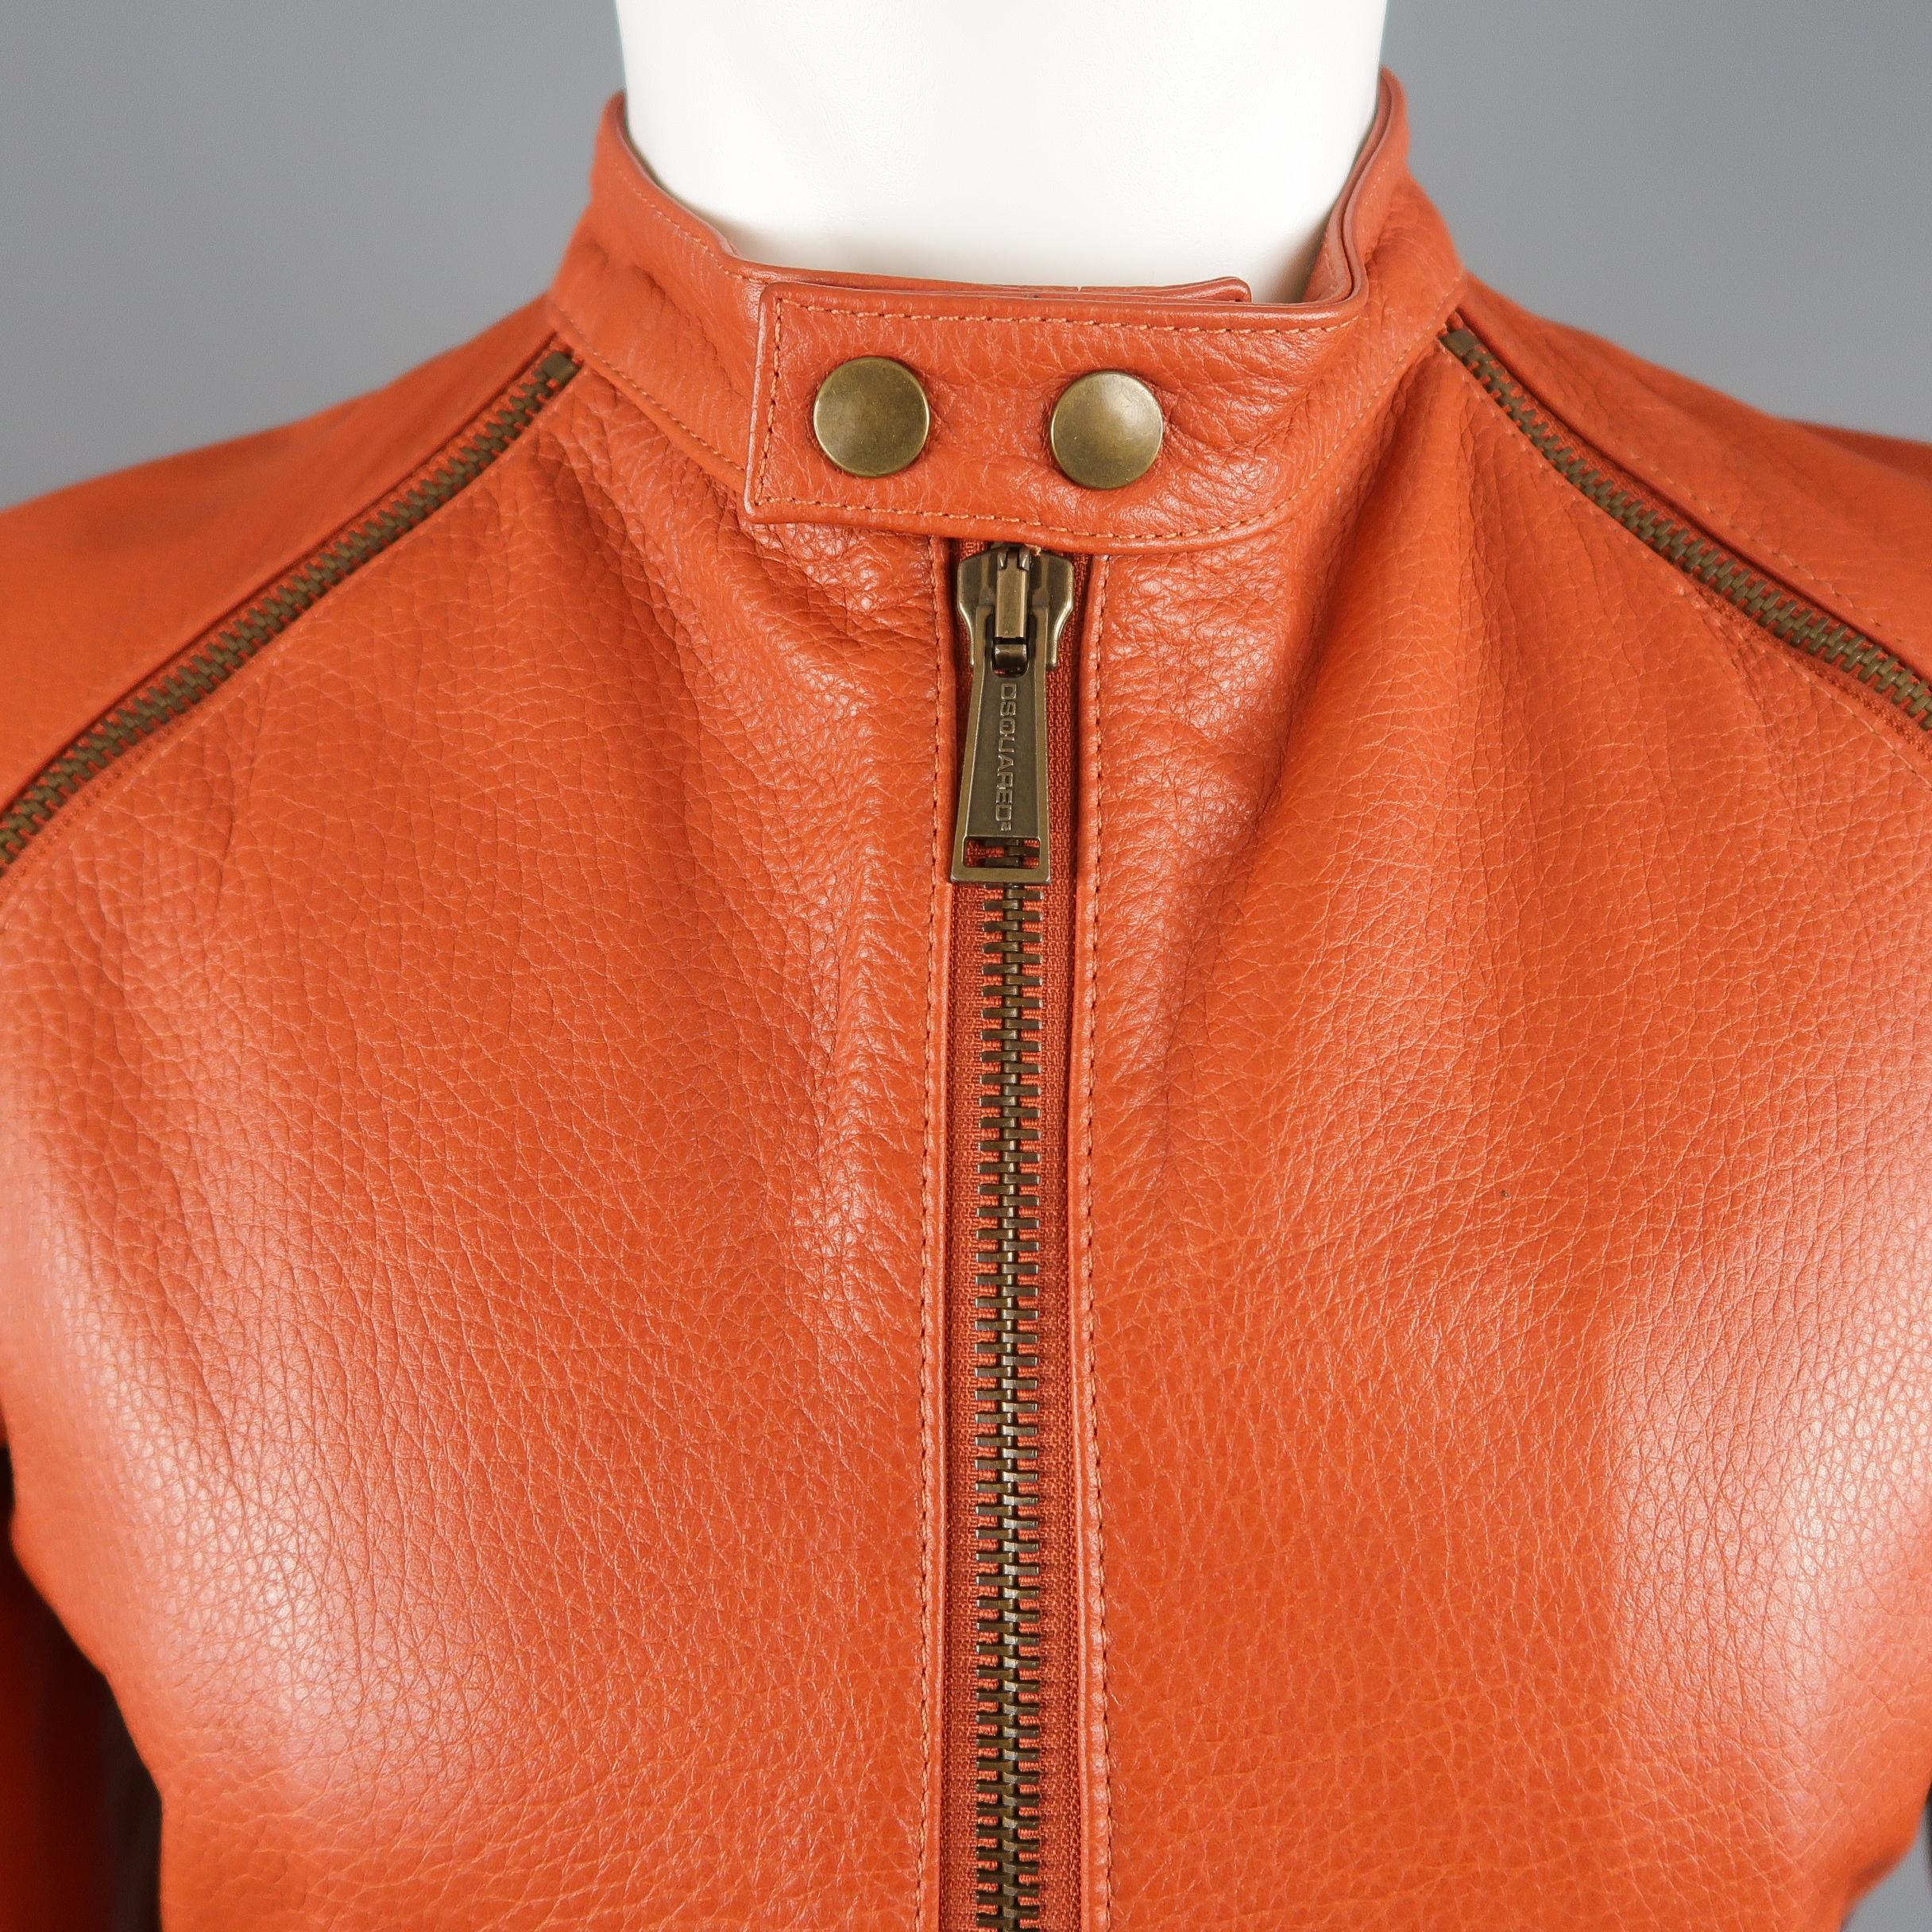 DSQUARED2 biker jacket comes in orange textured leather with a band snap over collar, double zip up front, gathered side panels, and antique gold tone zip sleeves. Minor wear shown in detail shots. Made in Italy.
 
Good Pre-Owned Condition.
Marked: